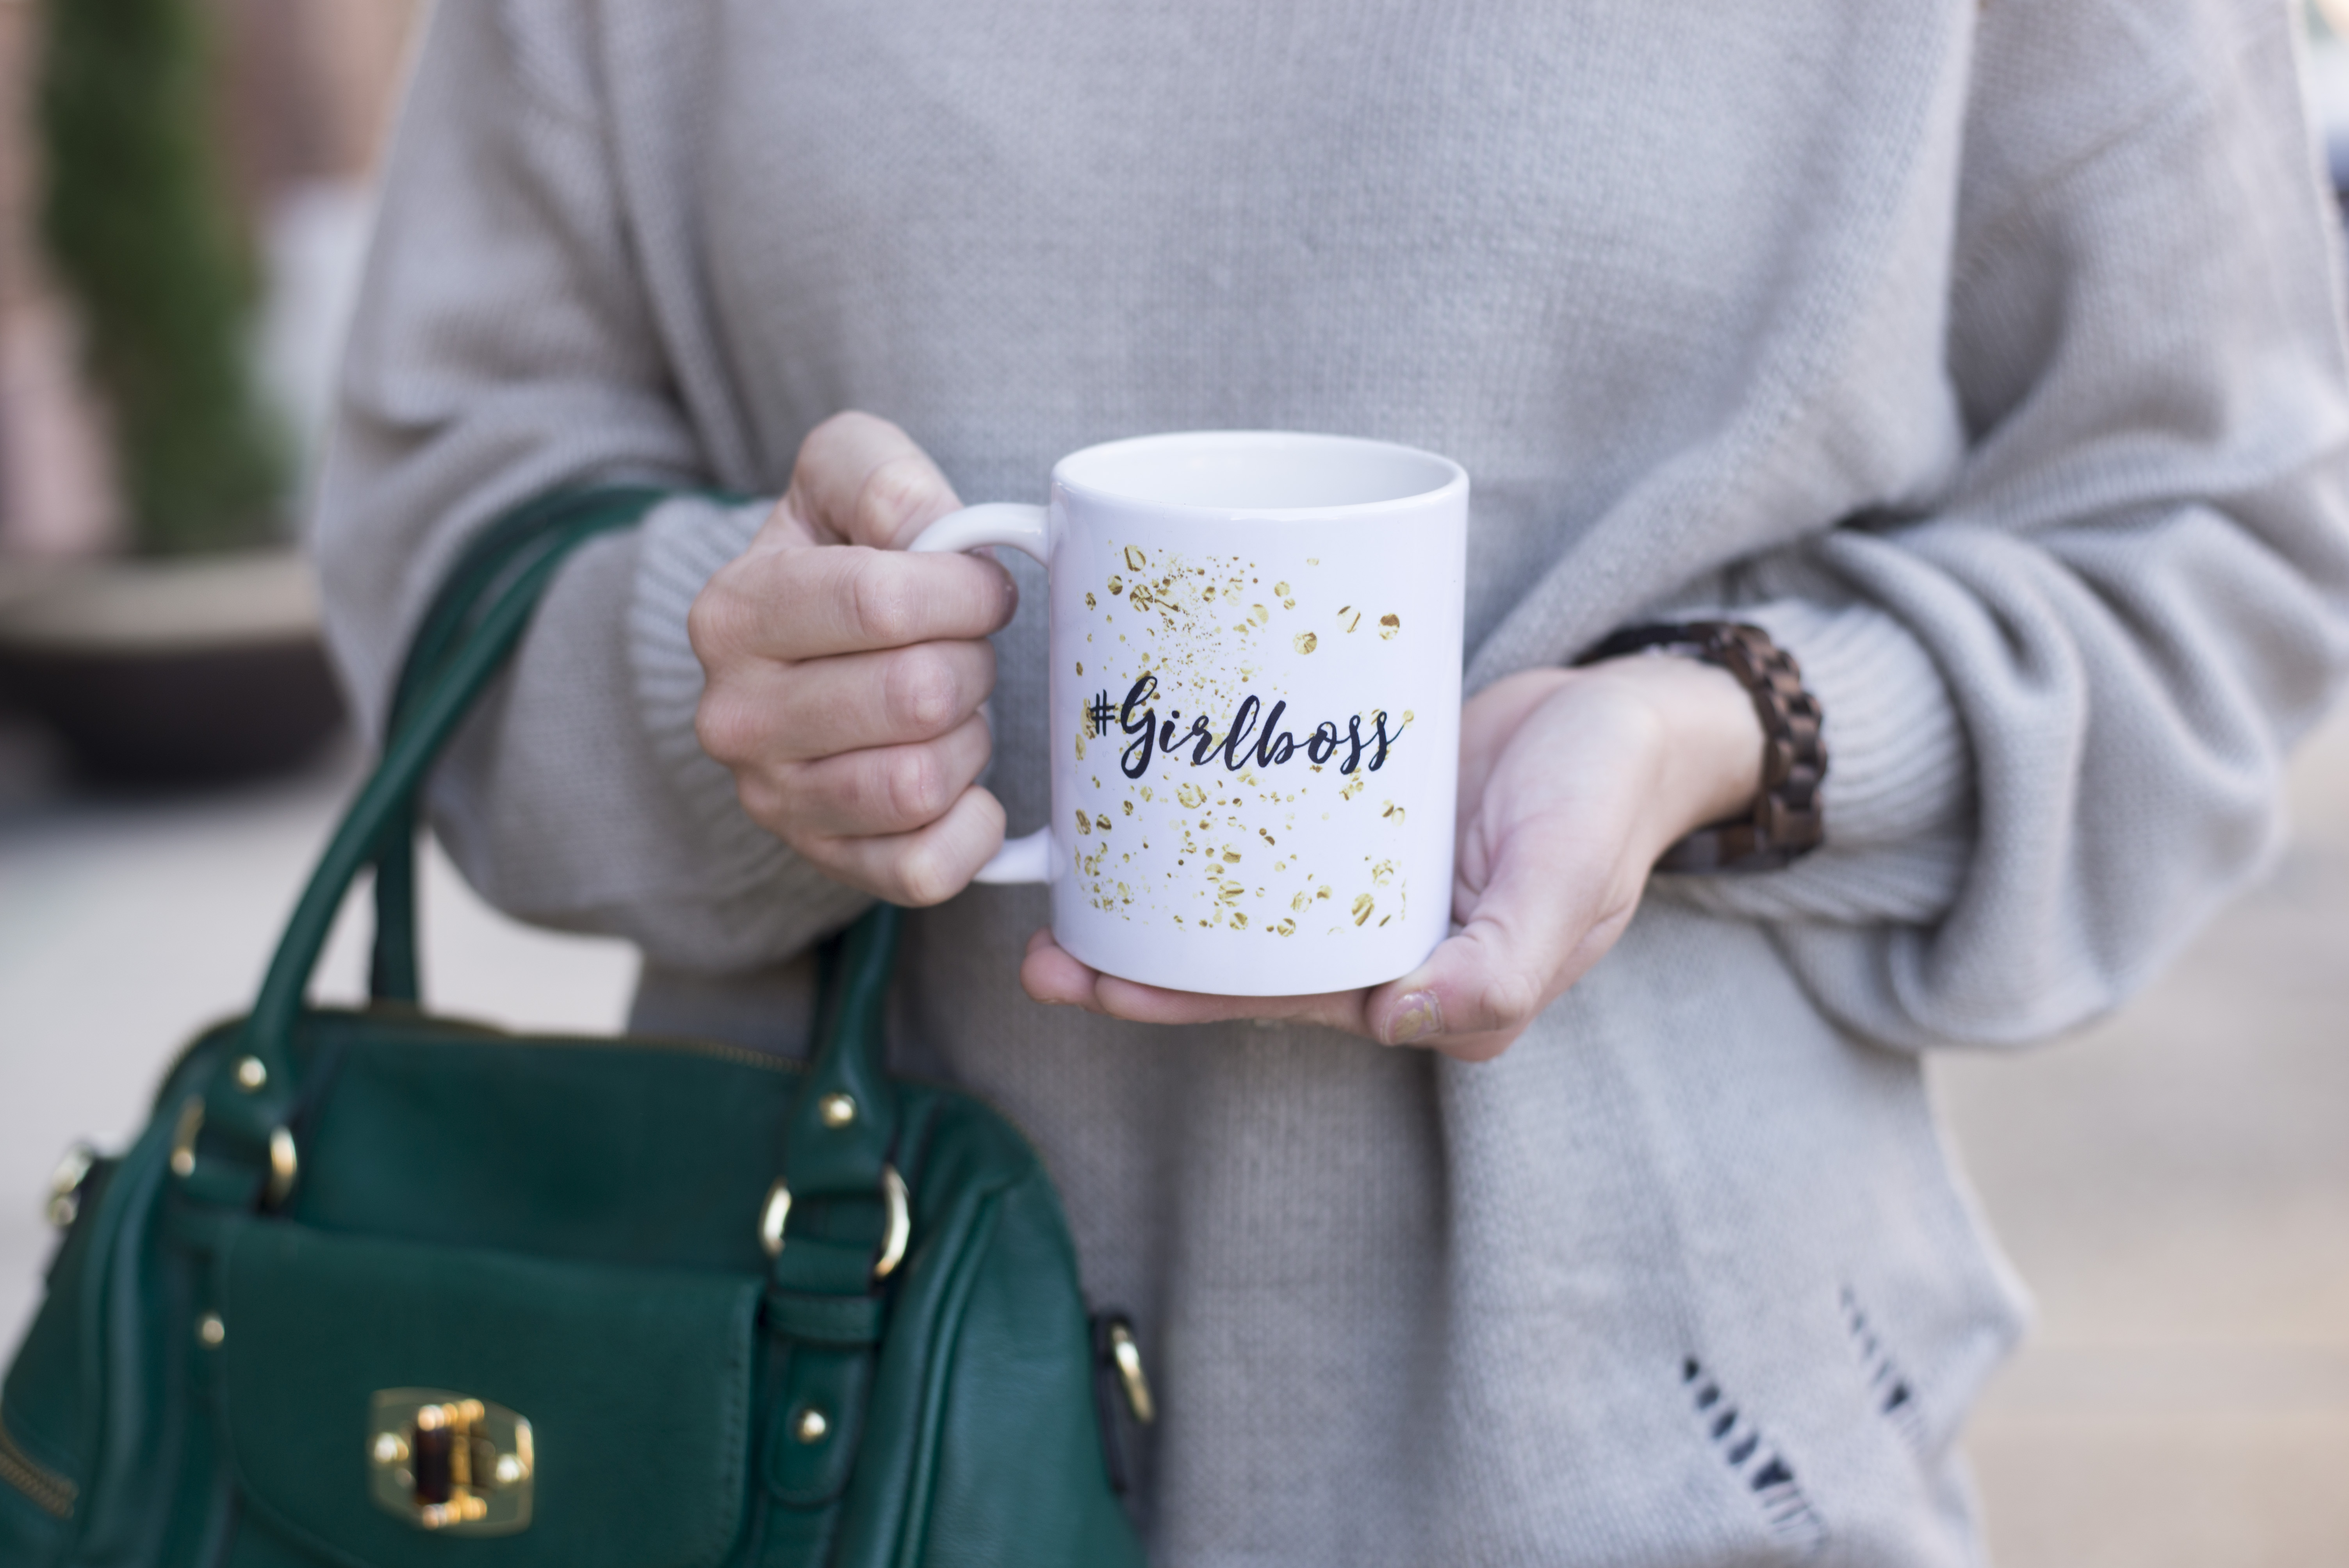 It's super important to support our fellow girlbosses! I'm sharing a little inspiration on ways to support other women and celebrate your own successes.